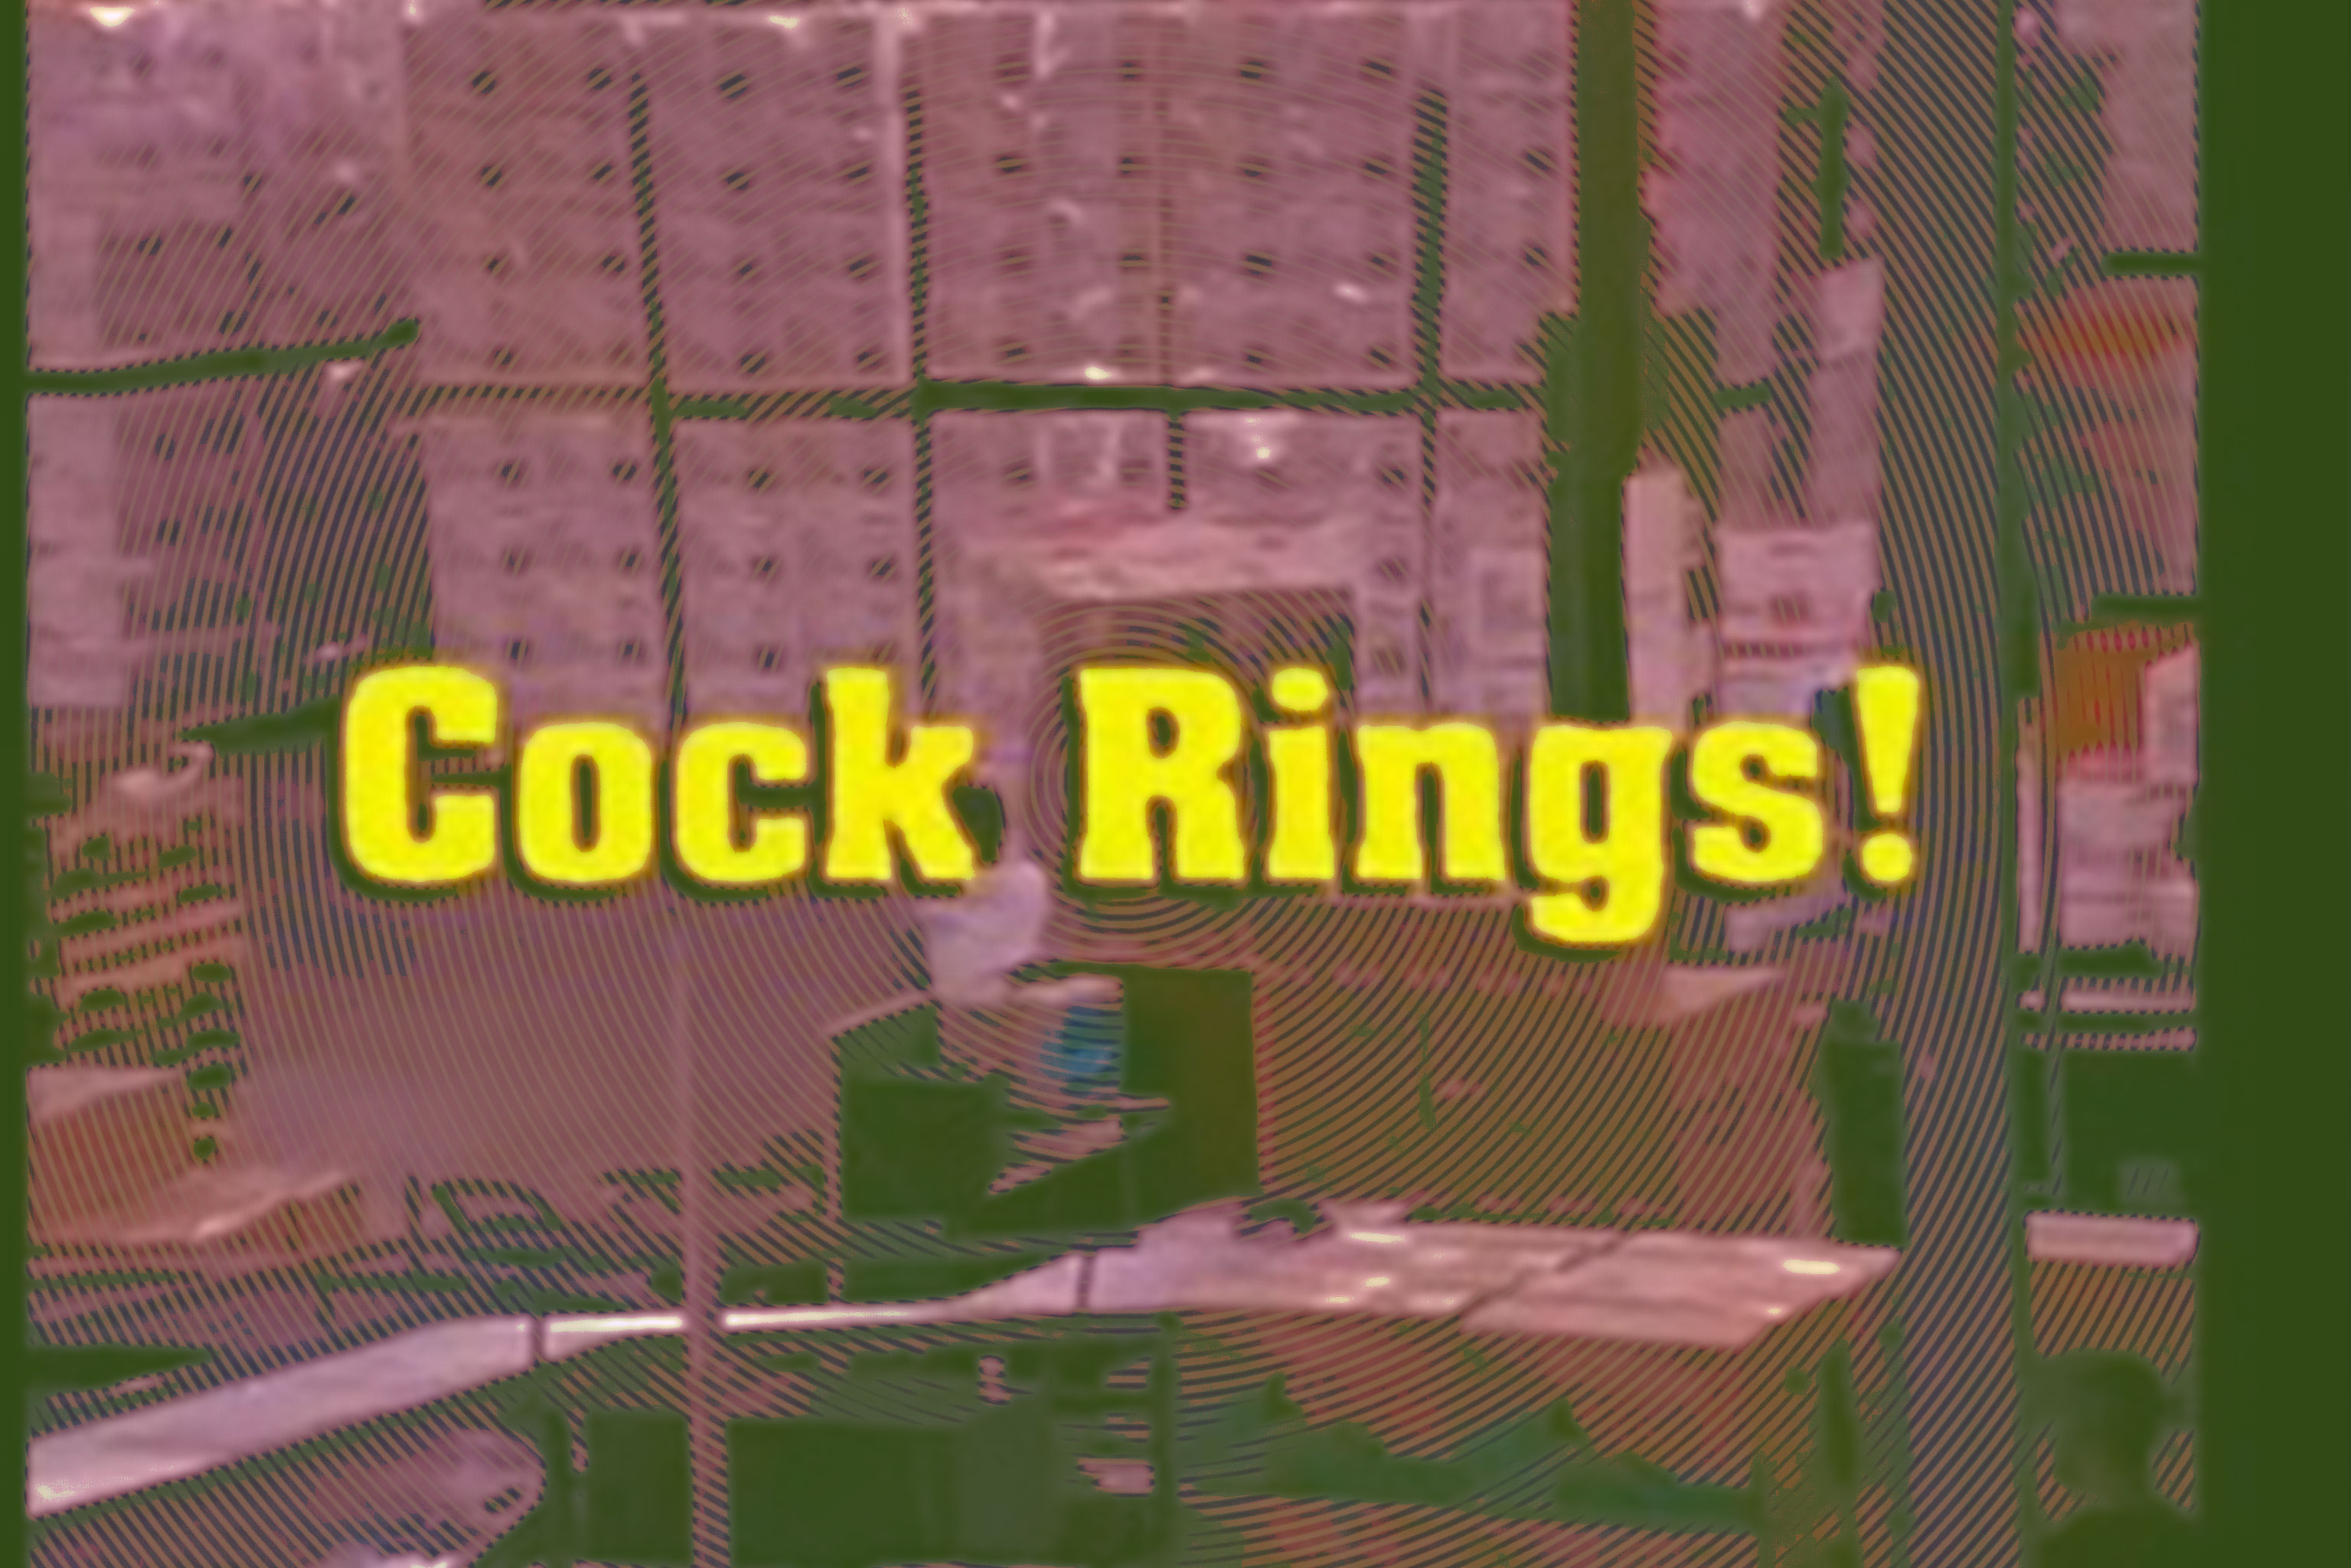 Cock Ring Warehouse, Mr Show, Cockrings, Penis Rings, Erection, Joke, Funny, Comedy